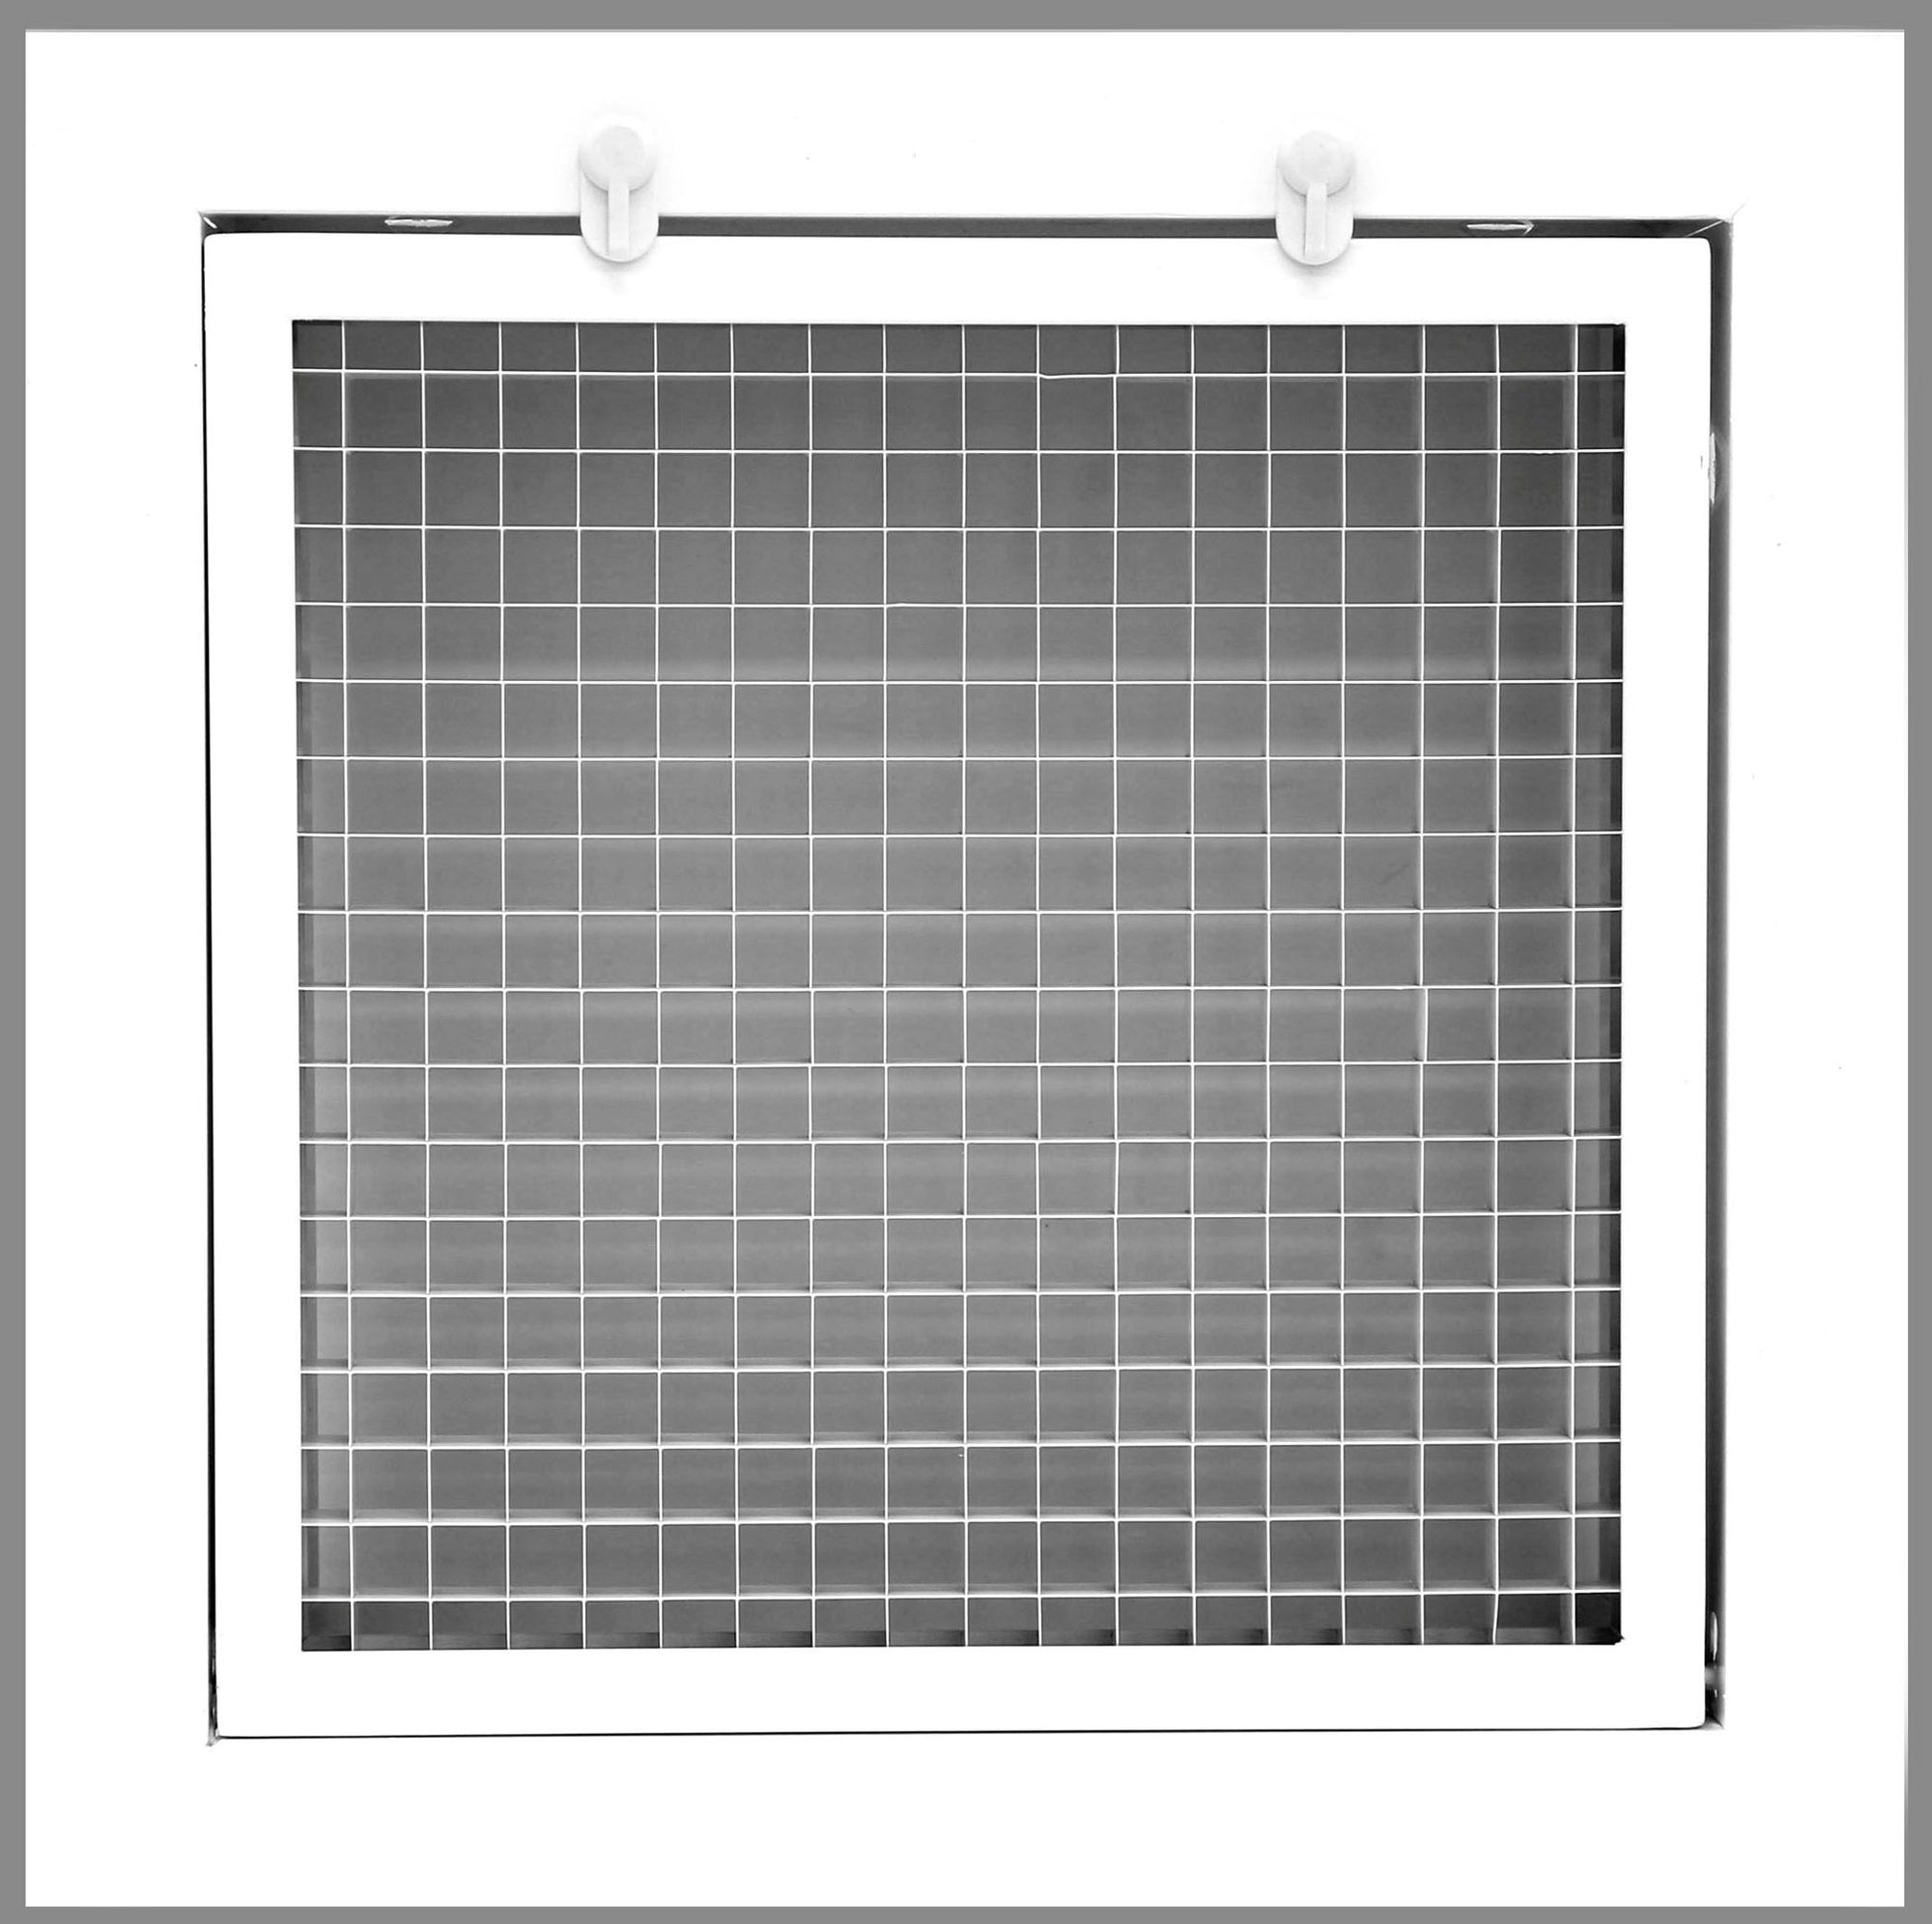 6" x 6" Cube Core Eggcrate Return Air Filter Grille for 1" Filter